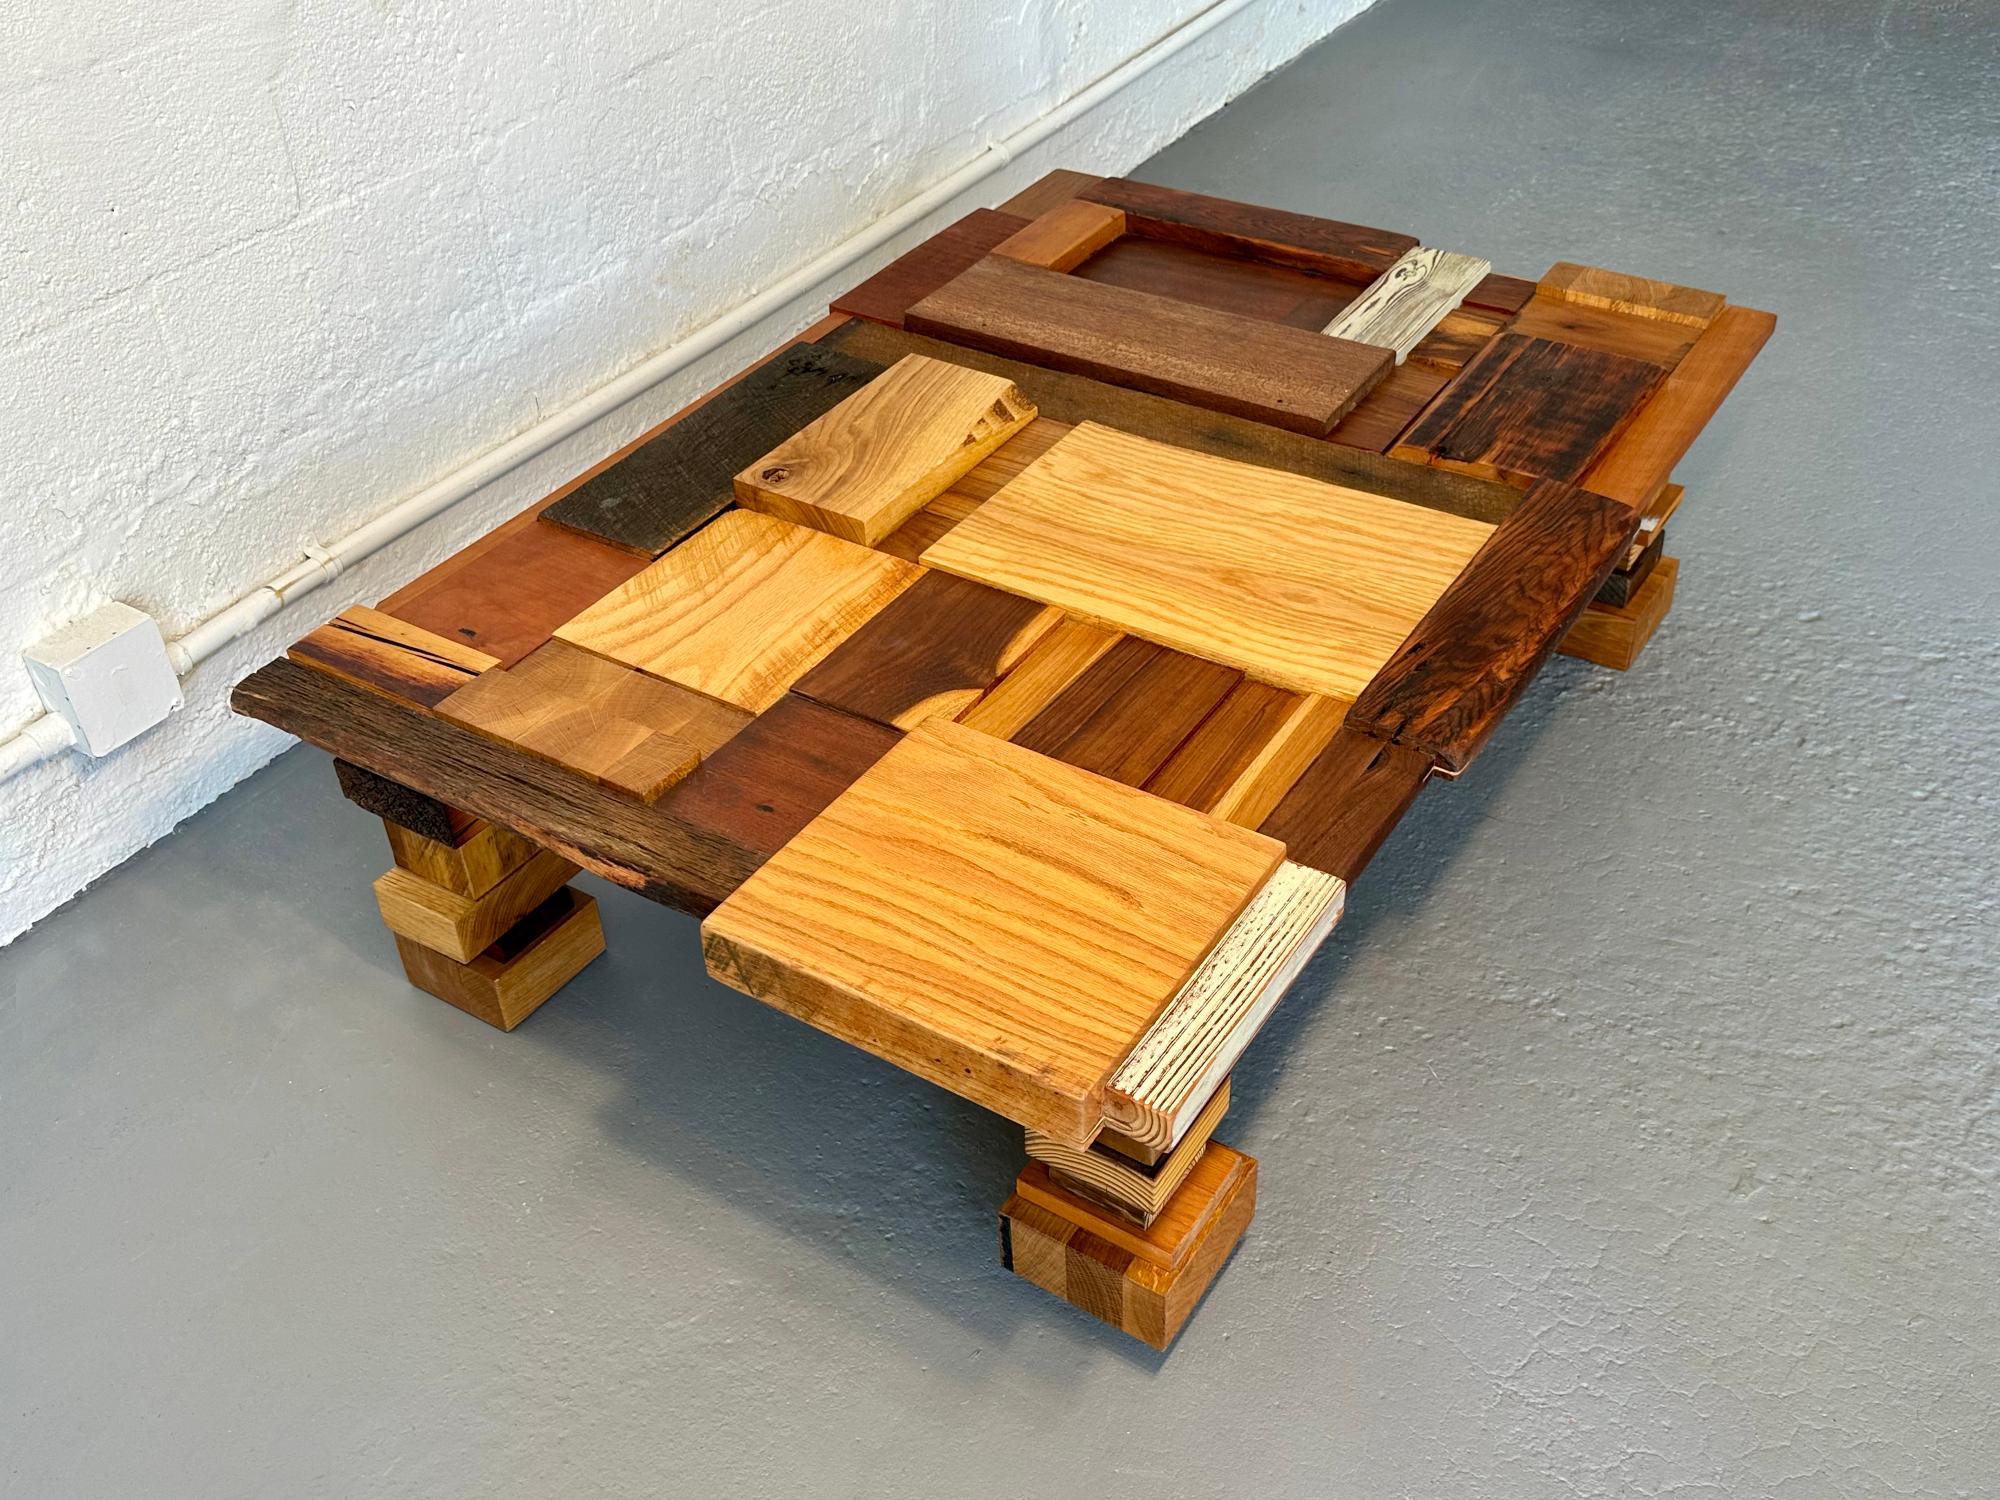 Hand-Crafted Reclaimed Wood Block Coffee Table Designed and Handcrafted by Rafael Calvo For Sale